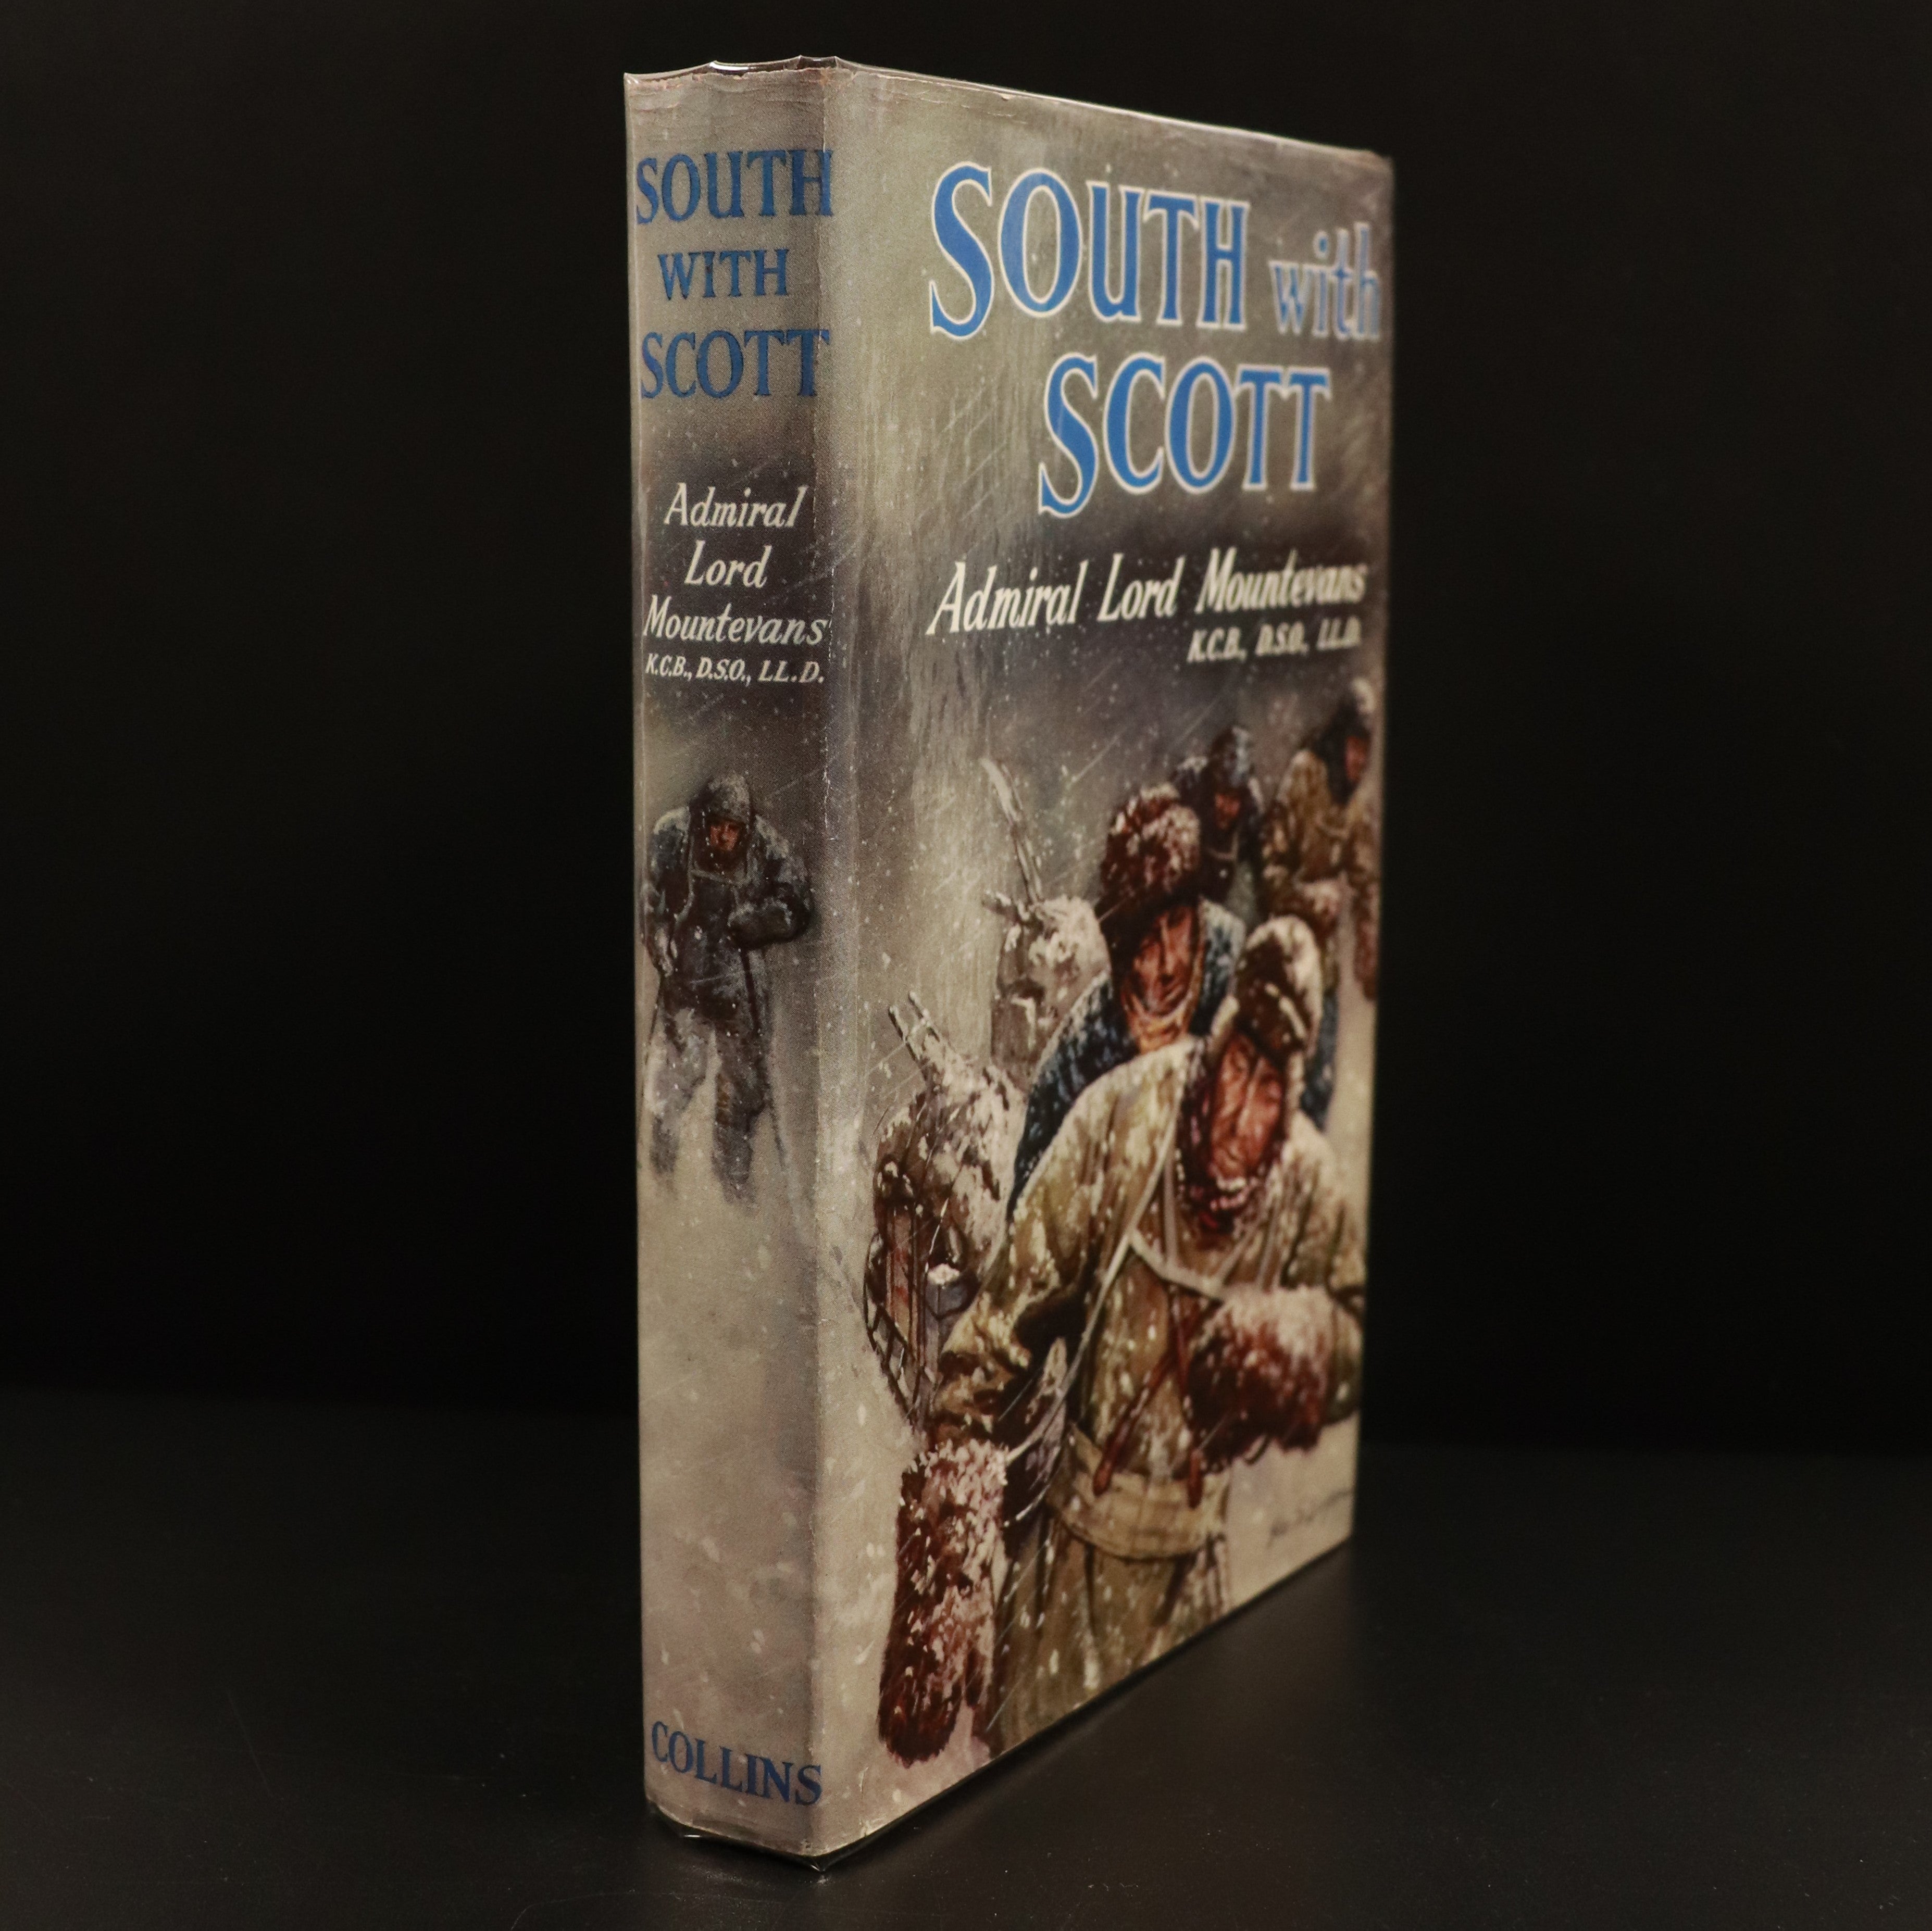 1957 South With Scott by Lord Mountevans 1st Edition Antarctic Exploration Book